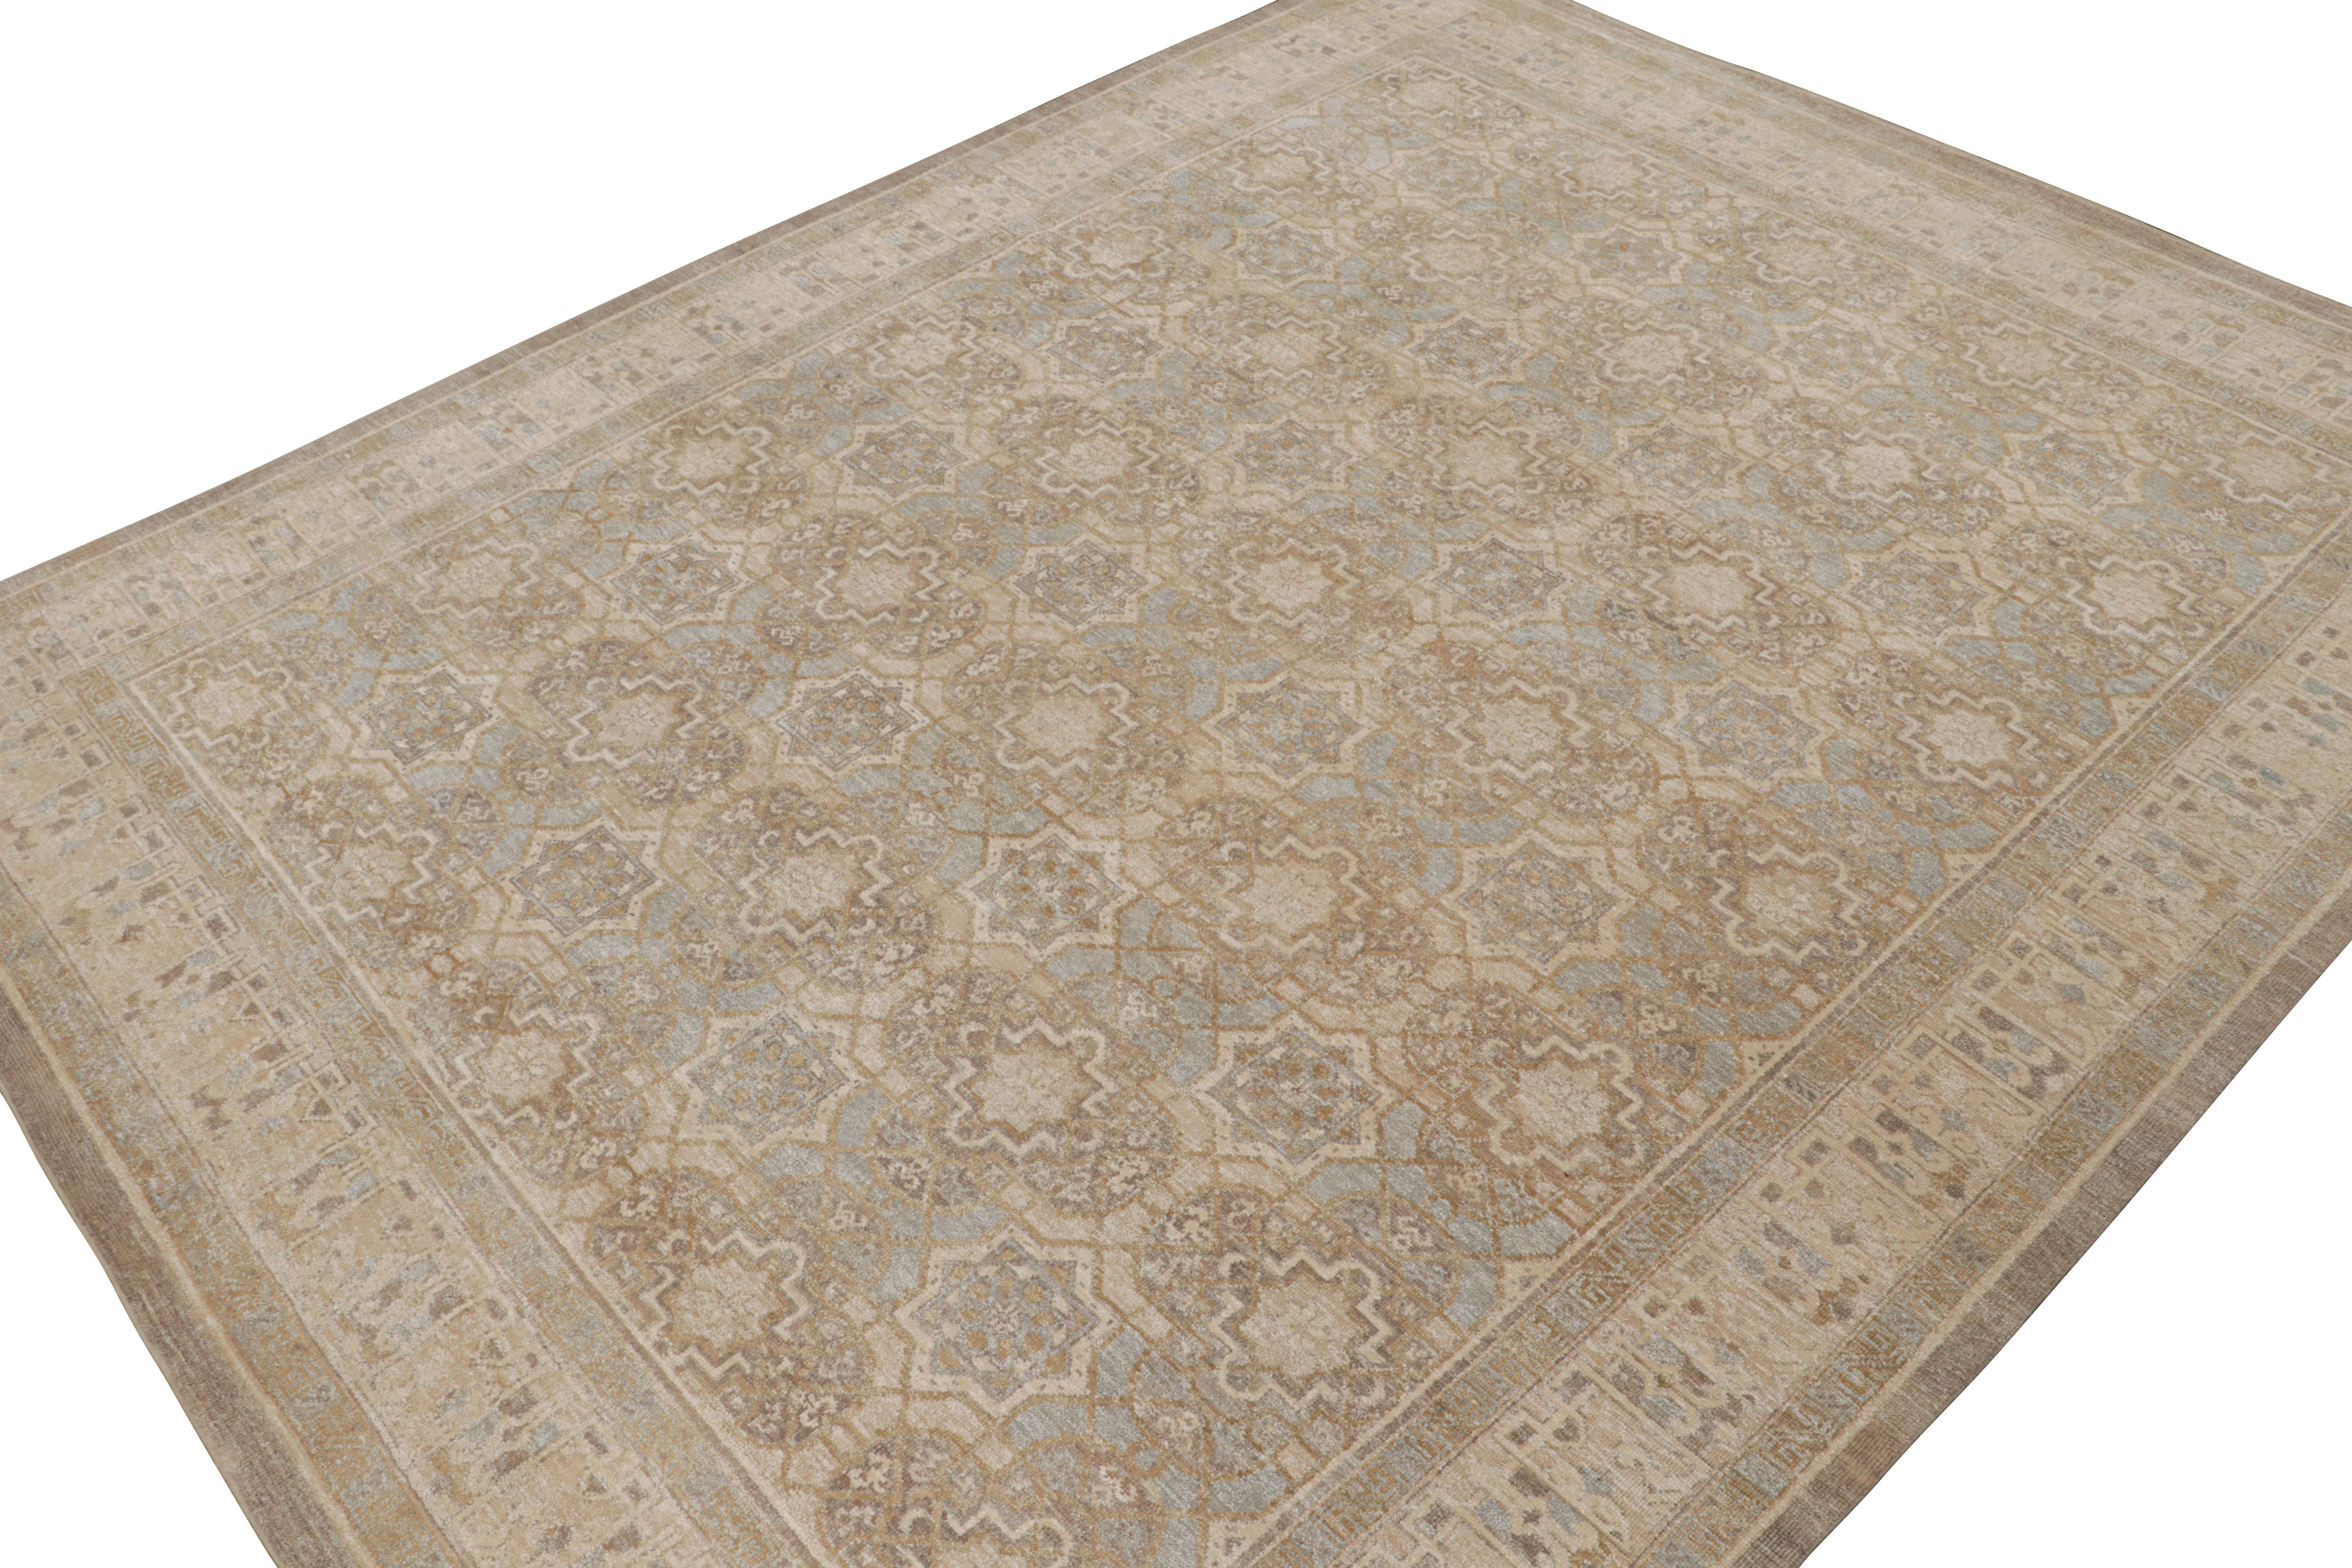 This 12x15 rug is inspired by antique Oushak rugs—from a bold new Modern Classics Collection by Rug & Kilim. Hand-knotted in silk, it enjoys taupe and rust undertones, bright blue and gold accents, tribal motifs and floral patterns. 

On the